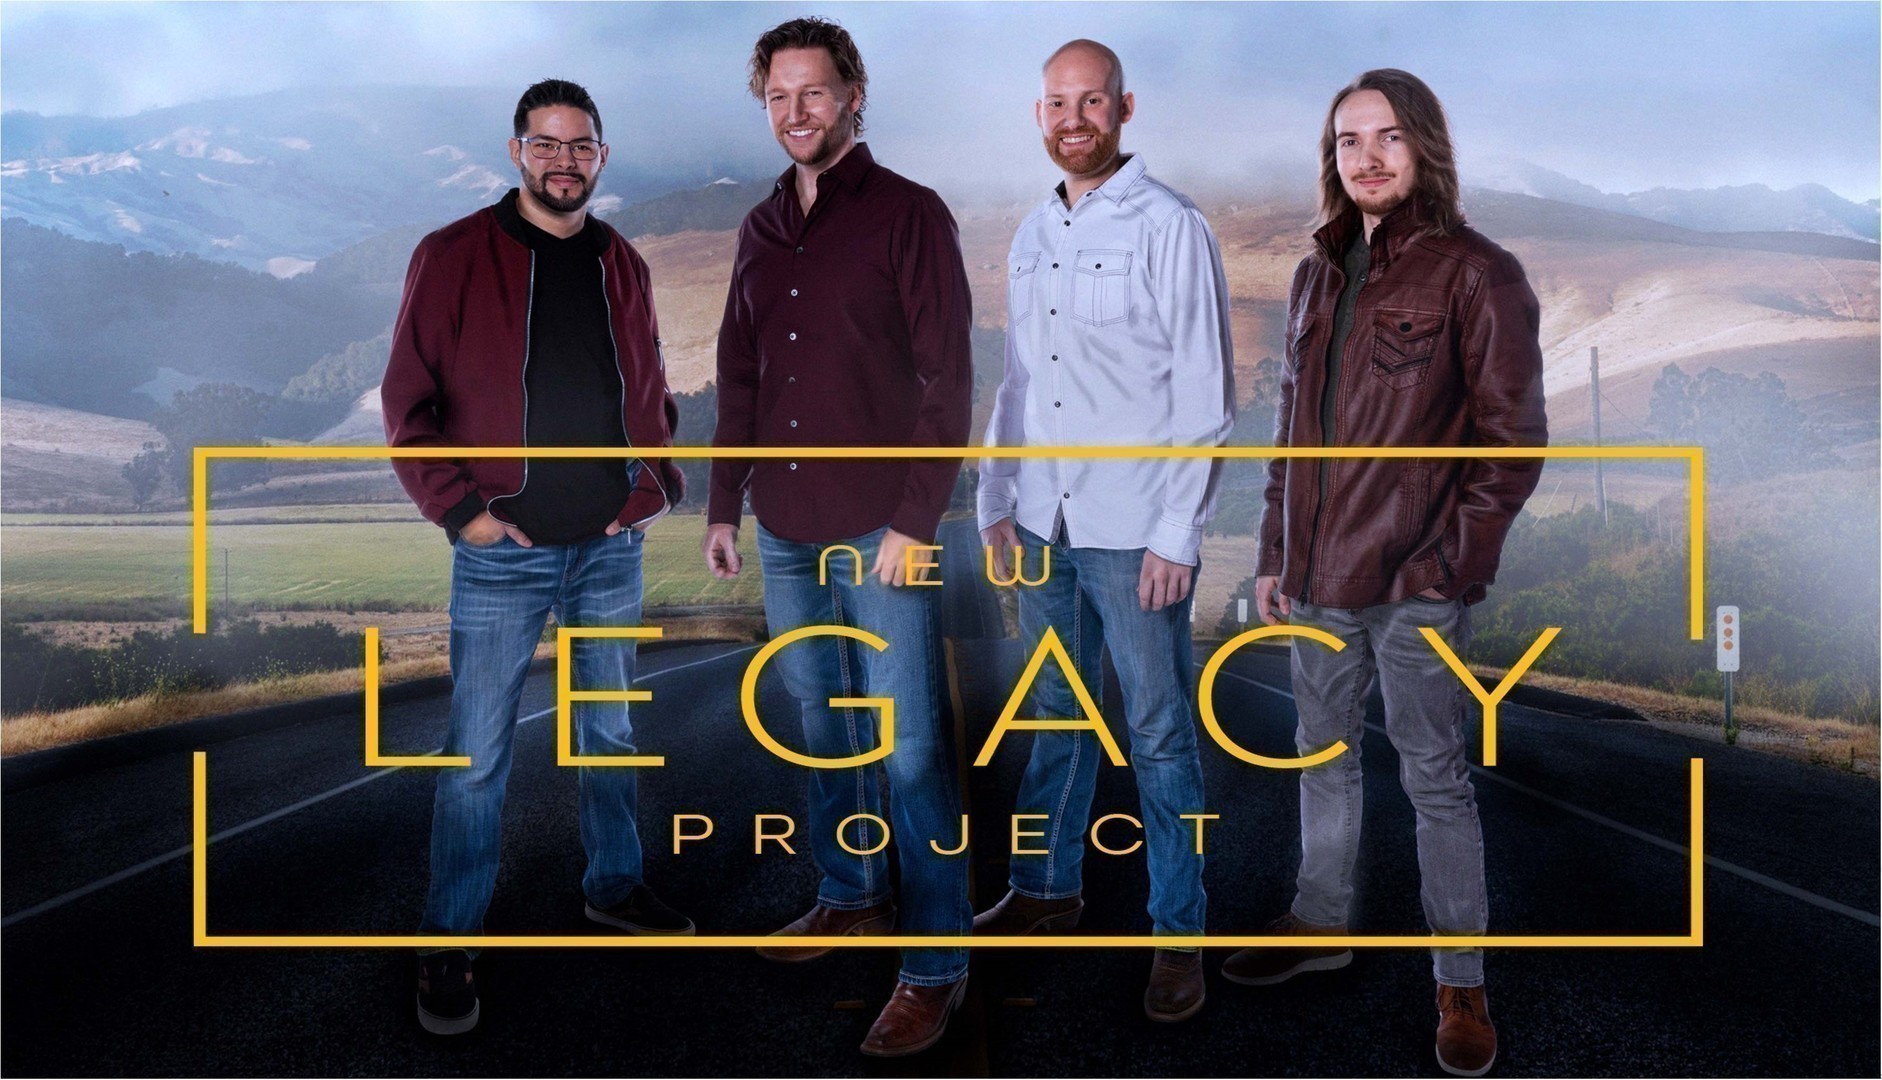 Live DEC 3 Concert in Phoenix with Popular Nashville-based Men's Vocal Band, NEW LEGACY PROJECT, Phoenix, Arizona, United States